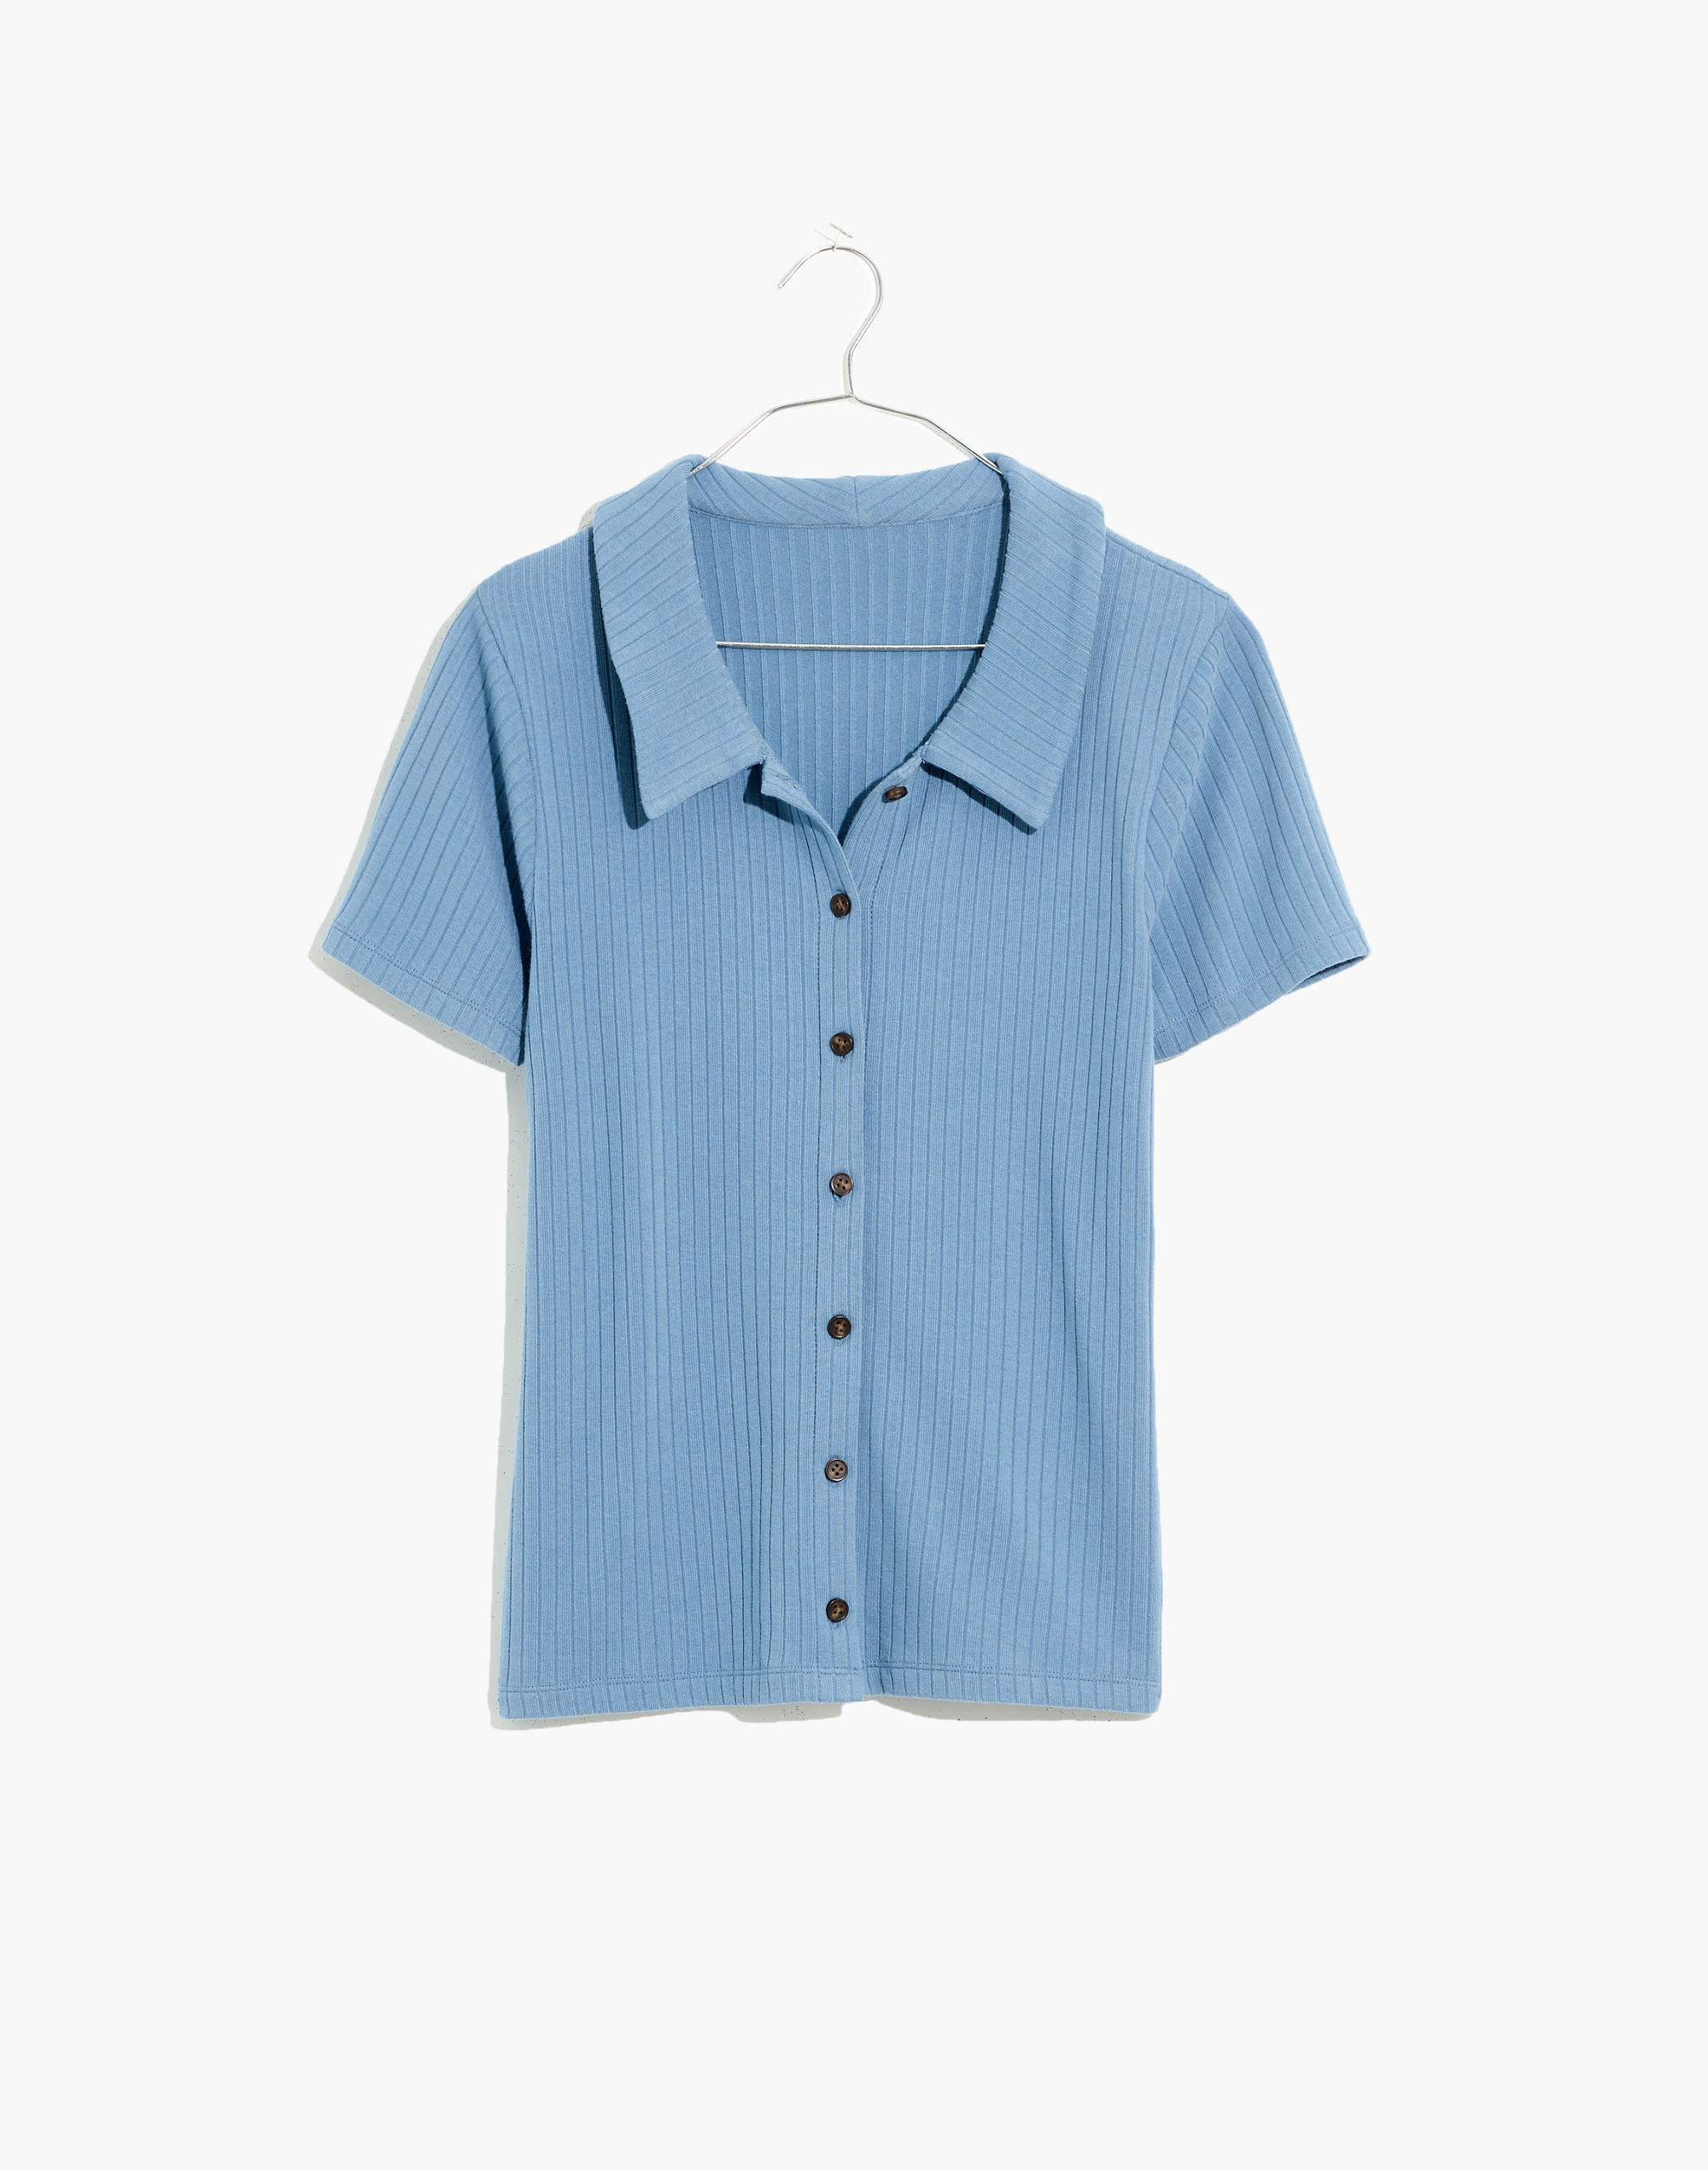 Ribbed polo shirt with short sleeves, navy blue, La Redoute